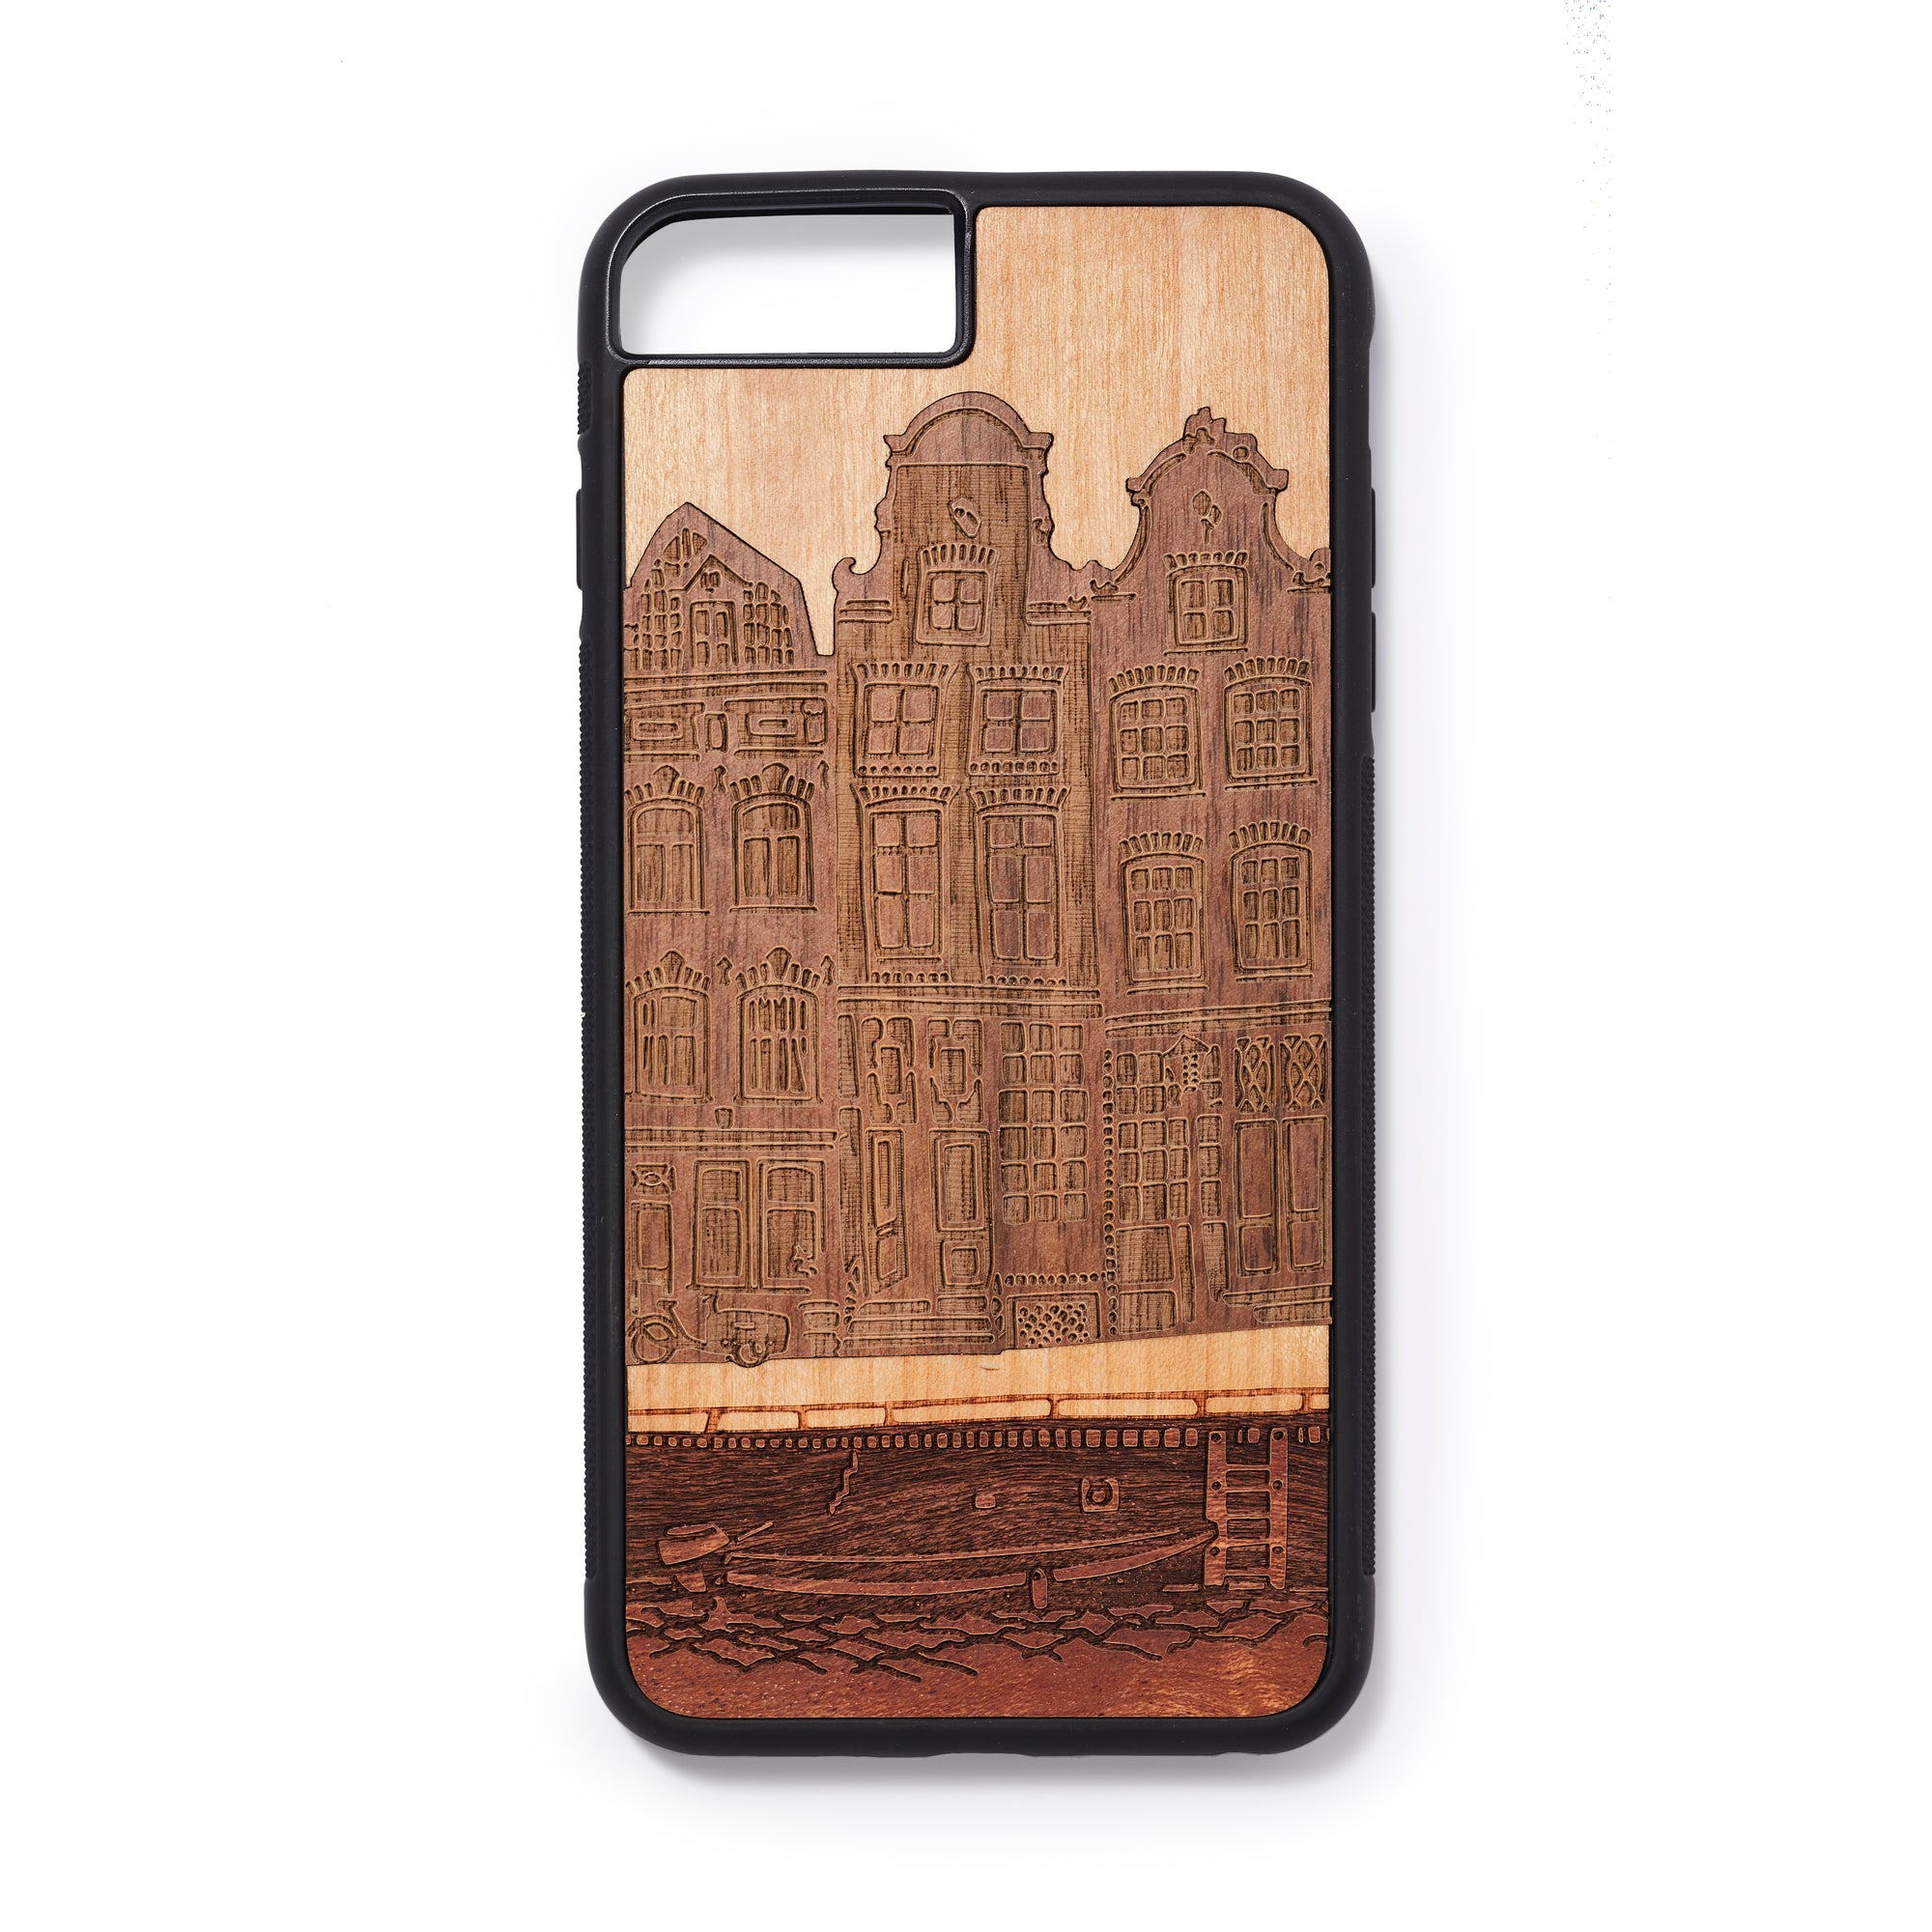 Wooden Iphone 6,7 and 8 plus back case house design - Woodstylz